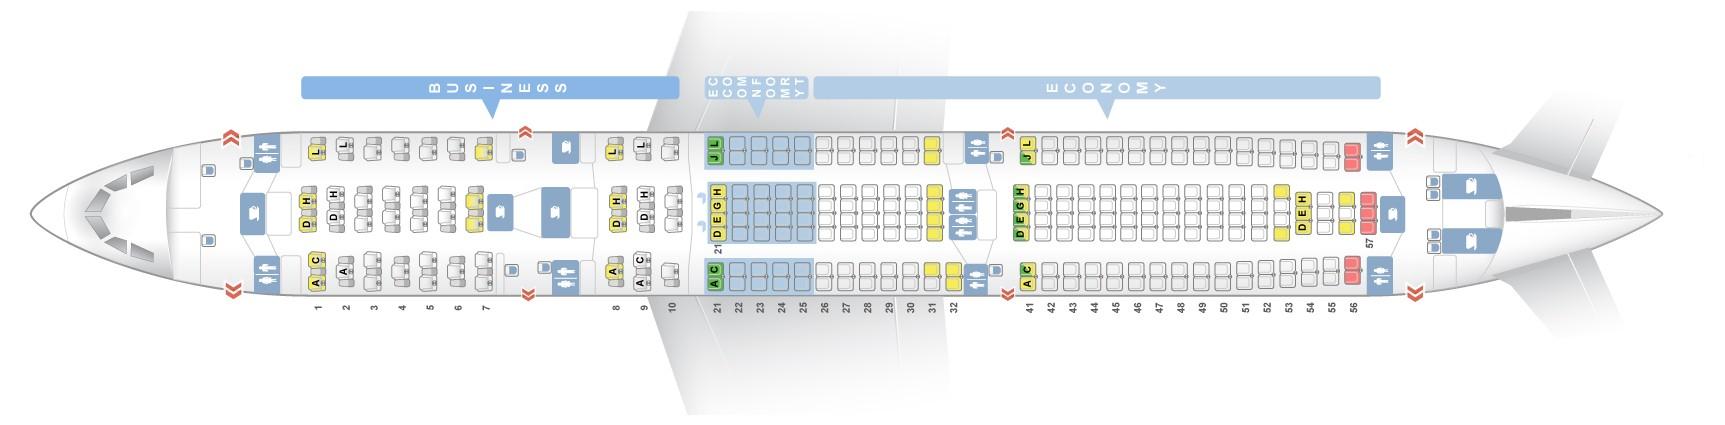 airbus a330 cockpit layout